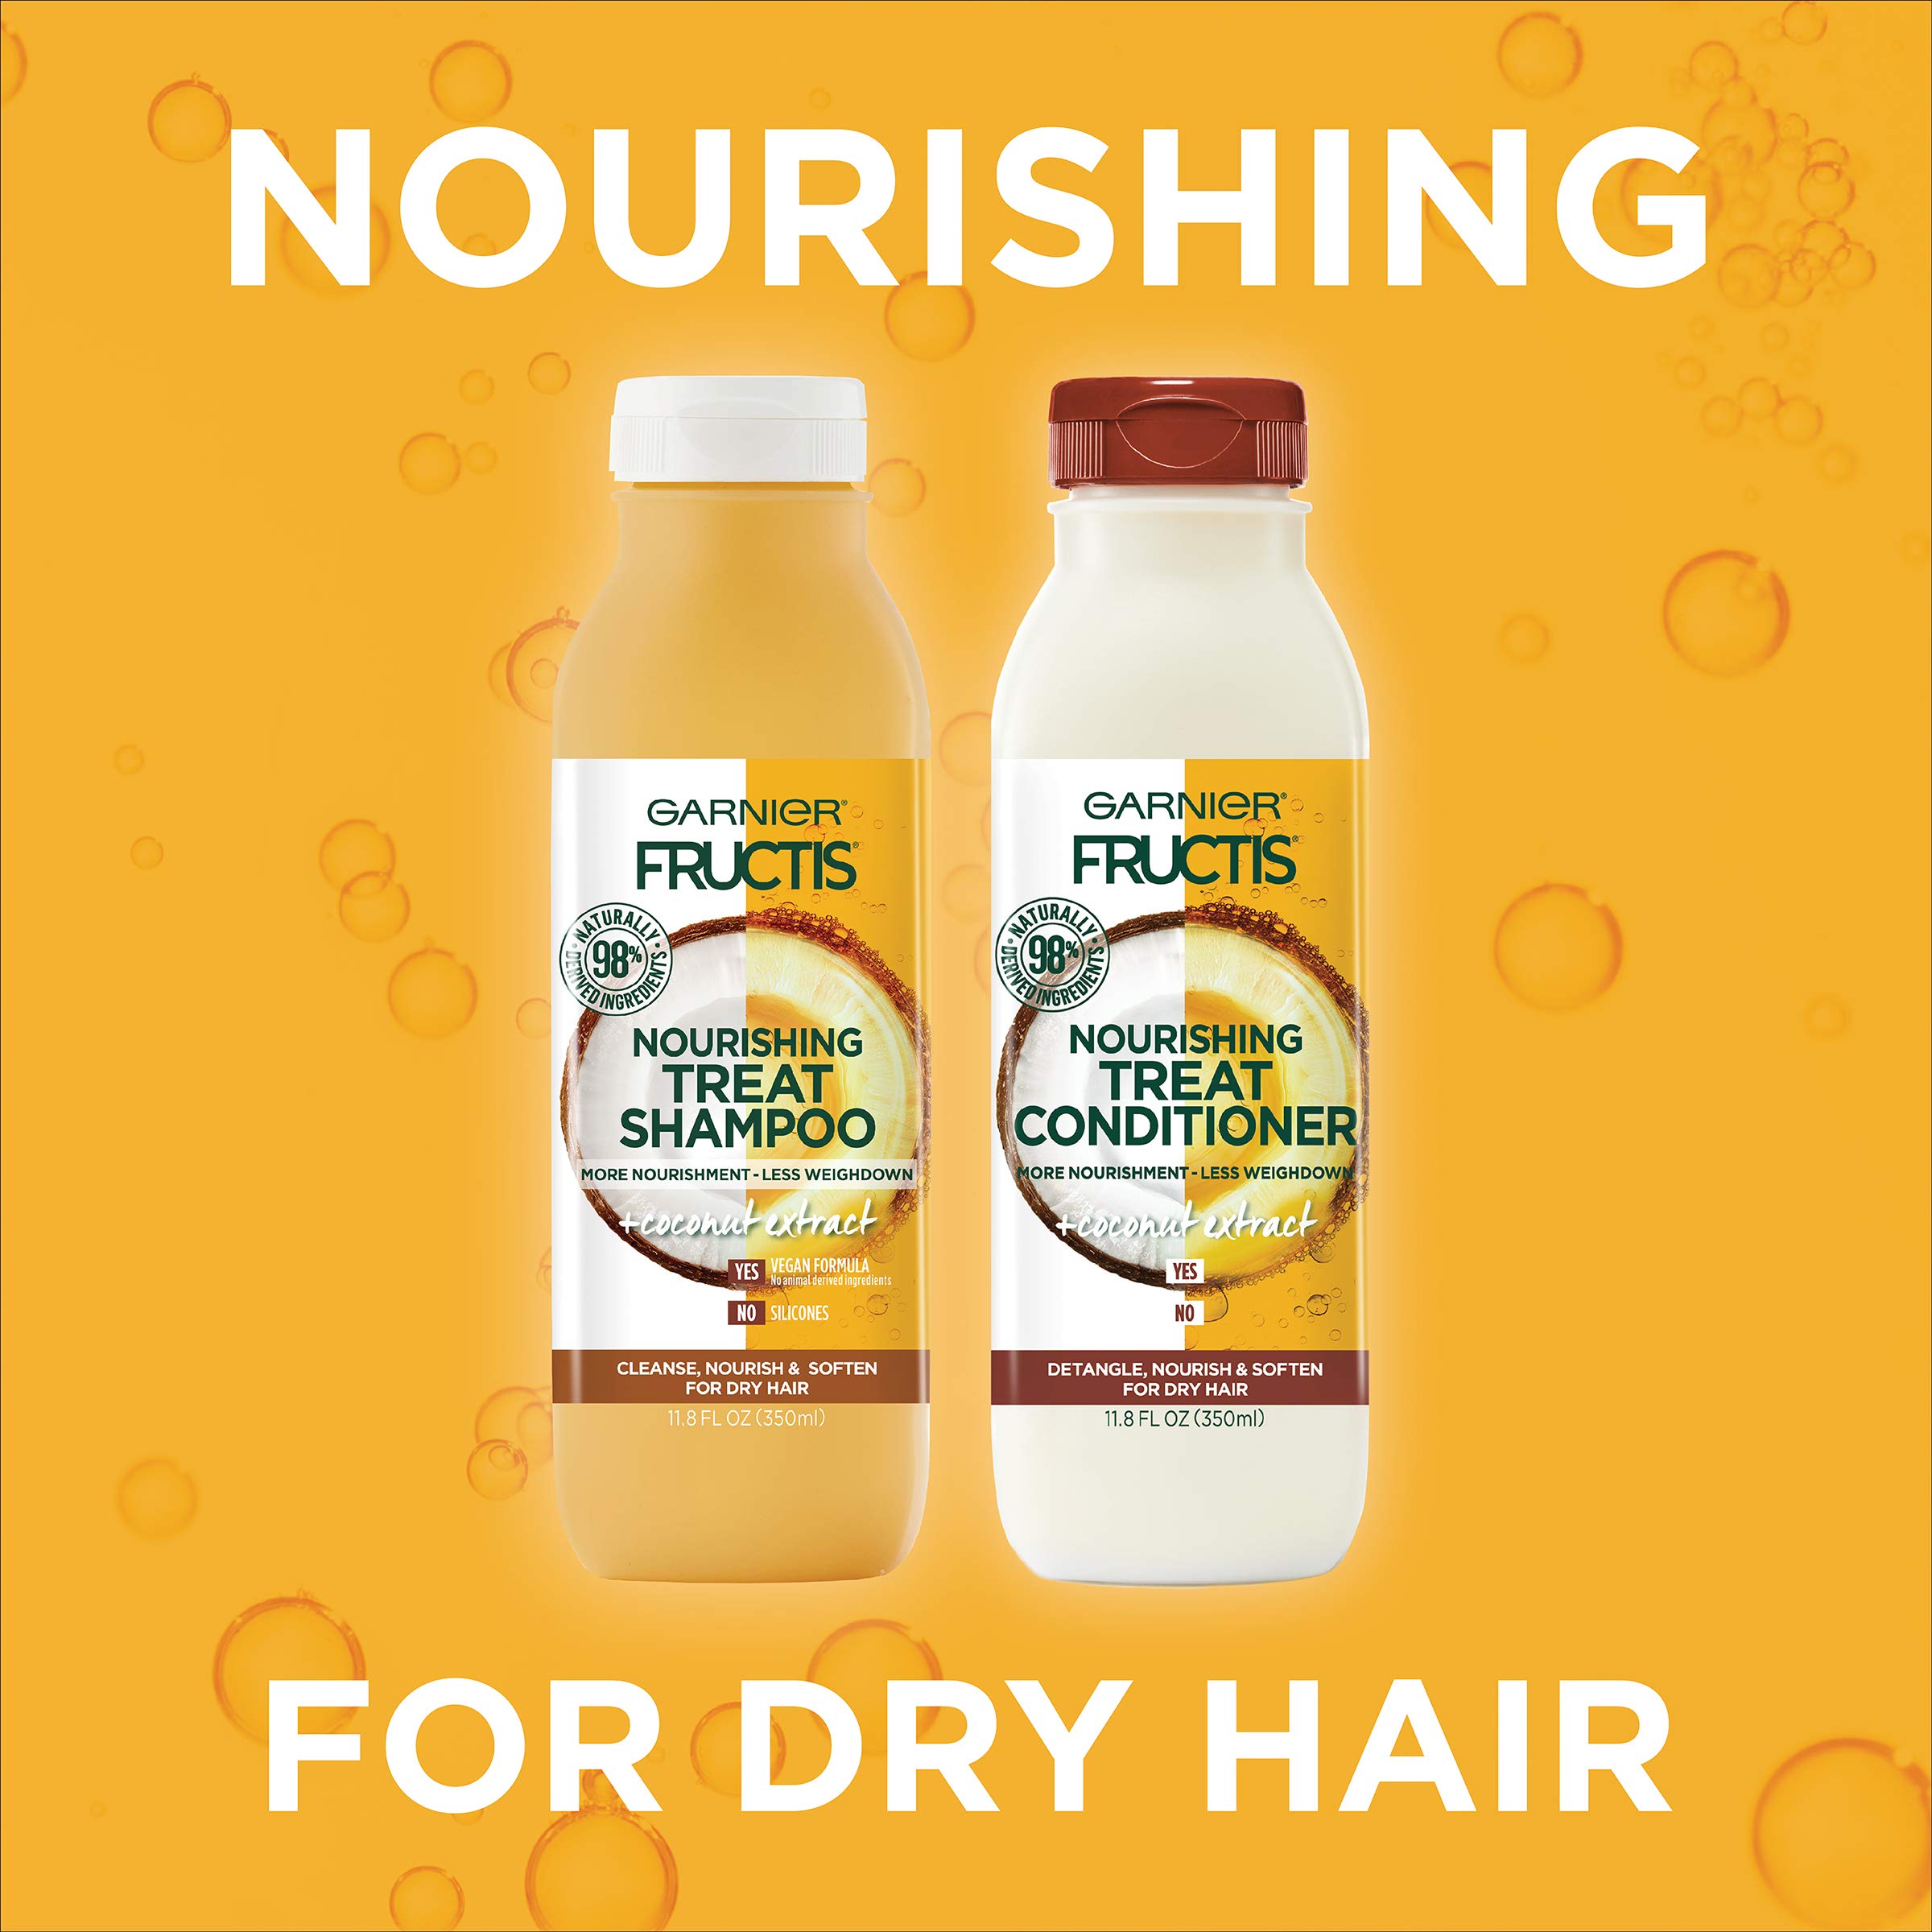 Garnier Fructis Nourishing Treat Conditioner, 98 Percent Naturally Derived Ingredients, Coconut, Nourish and Soften for Dry Hair, 11.8 fl. oz.